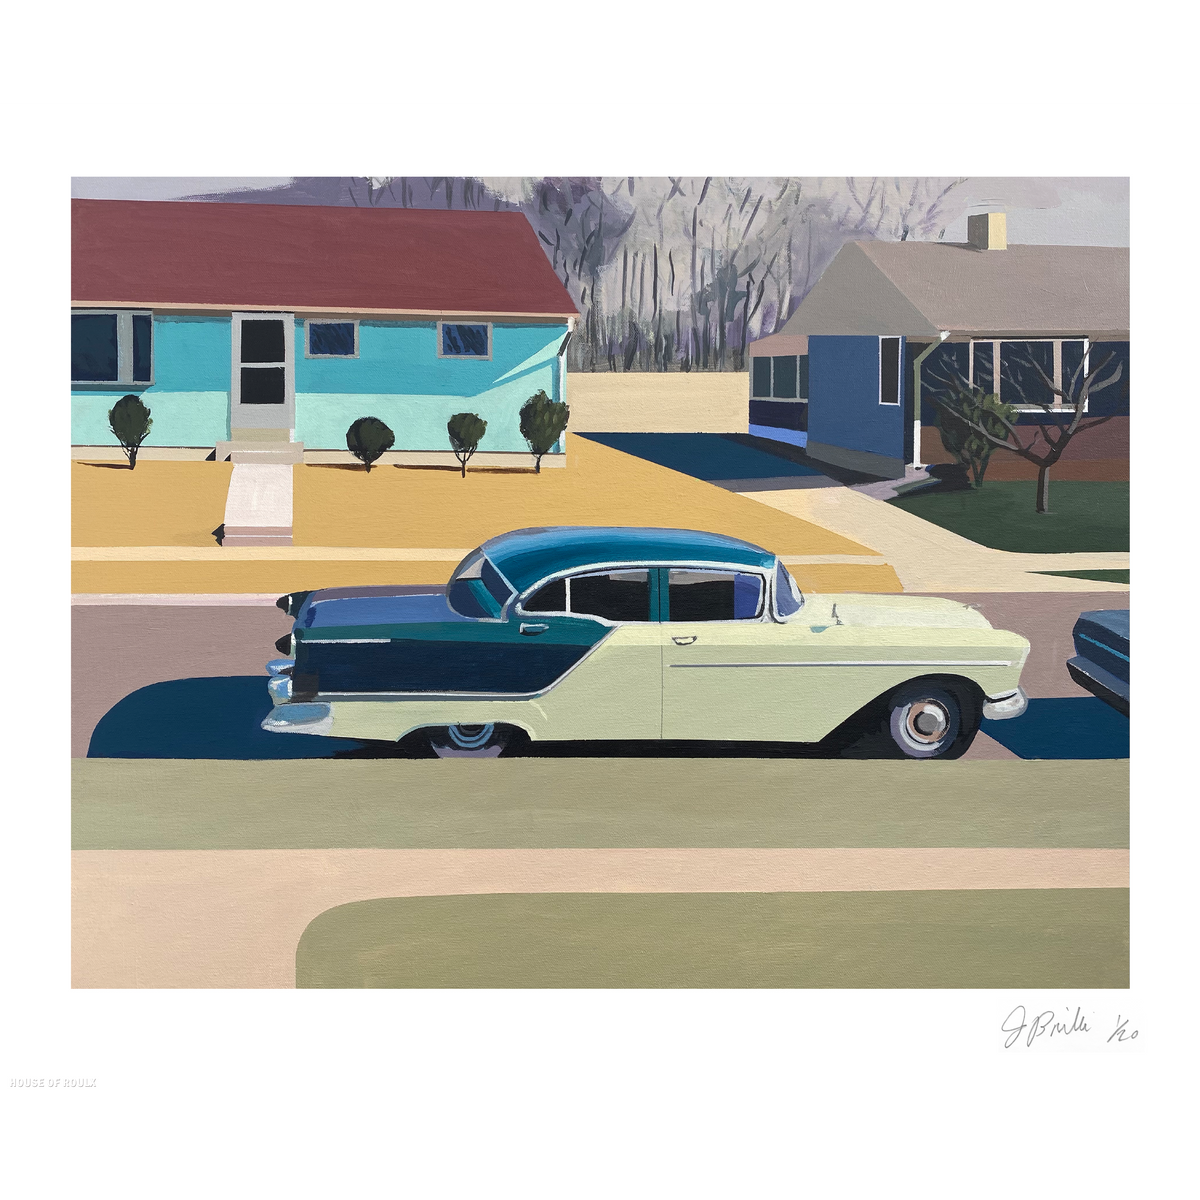 Jessica Brilli &quot;The Neighborhood&quot; - Archival Print, Limited Edition of 20 - 14 x 17&quot;